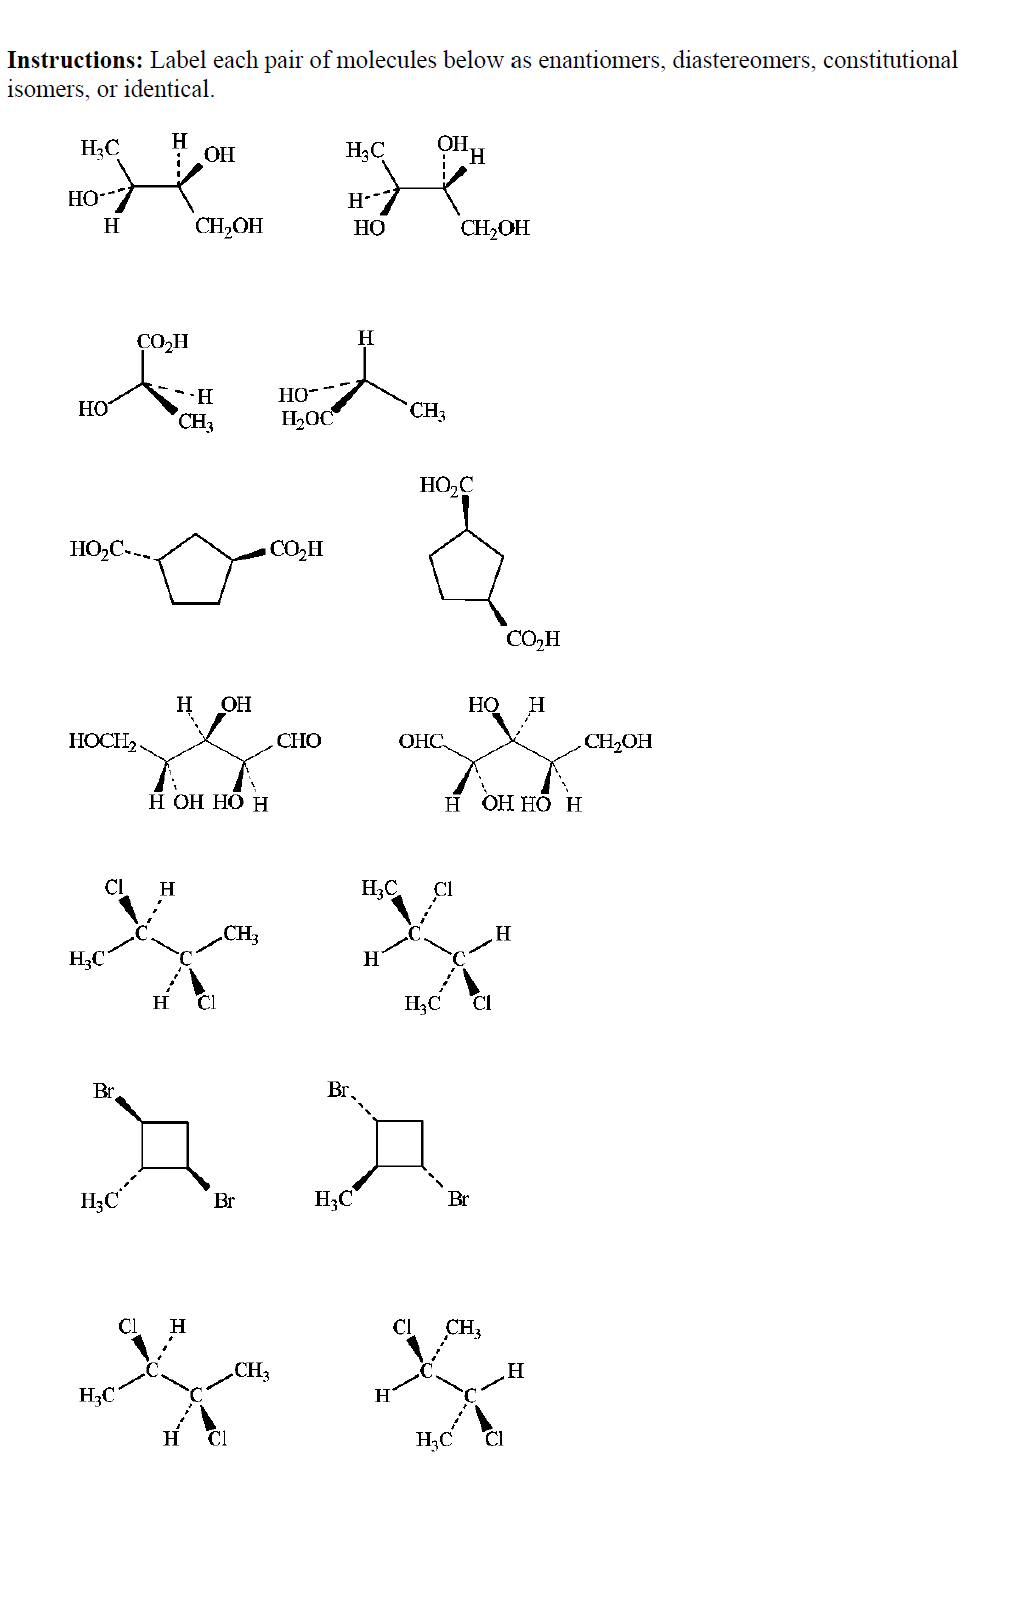 Instructions: Label each pair of molecules below as enantiomers, diastereomers, constitutional
isomers, or identical.
H3C
H.
OH
H3C
ОН
HO--
H
CH,OH
НО
CH2OH
CO,H
H
HO-
HO
CH3
H2OC
CH3
HO,C
HO,C--.
CO,H
CO,H
н Он
H
НОСI
CHO
ОНС
CH2OH
Н Он НО Н
н ОННО Н
H;C
CH3
H3C"
H
H
Cl
H3C
CI
Br
Br.
H;C^
H3C
Br
Br
CI
CH3
CH3
H
H3C
H
H;C
Cl
